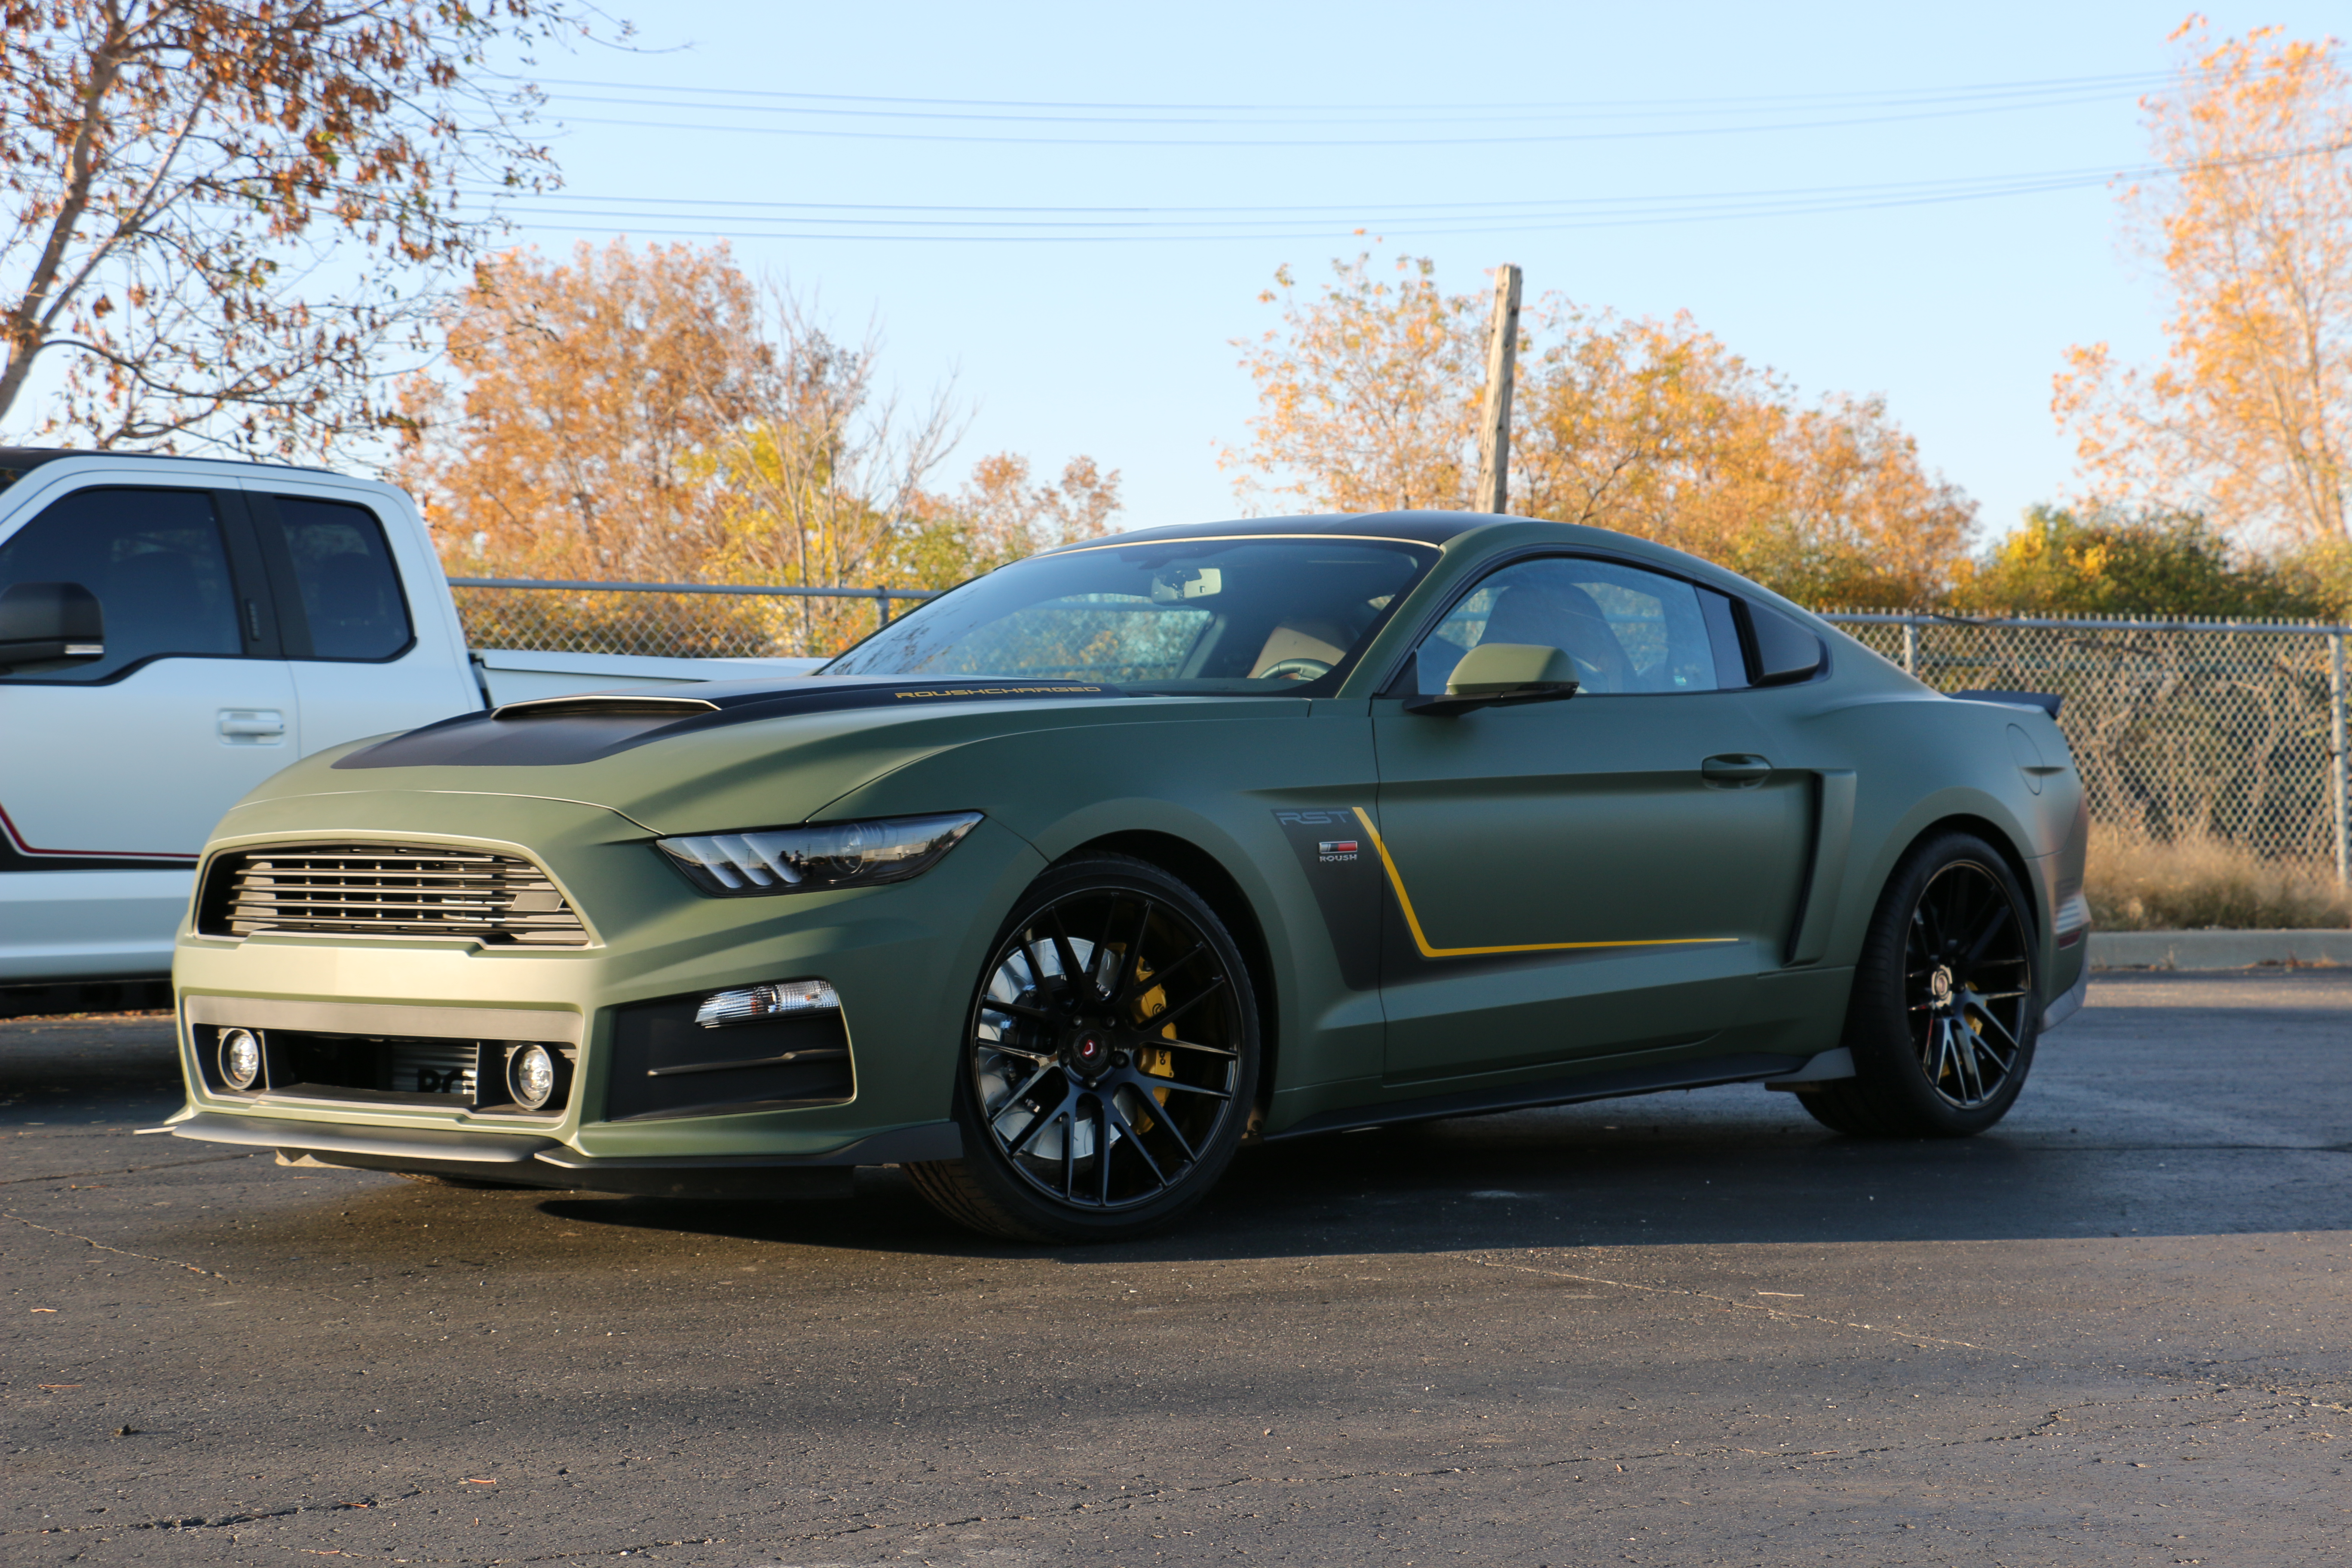 The brand new turbocharged ROUSH Mustang Ecoboost is ROUSH Performance's first-ever entry into the turbocharge market.